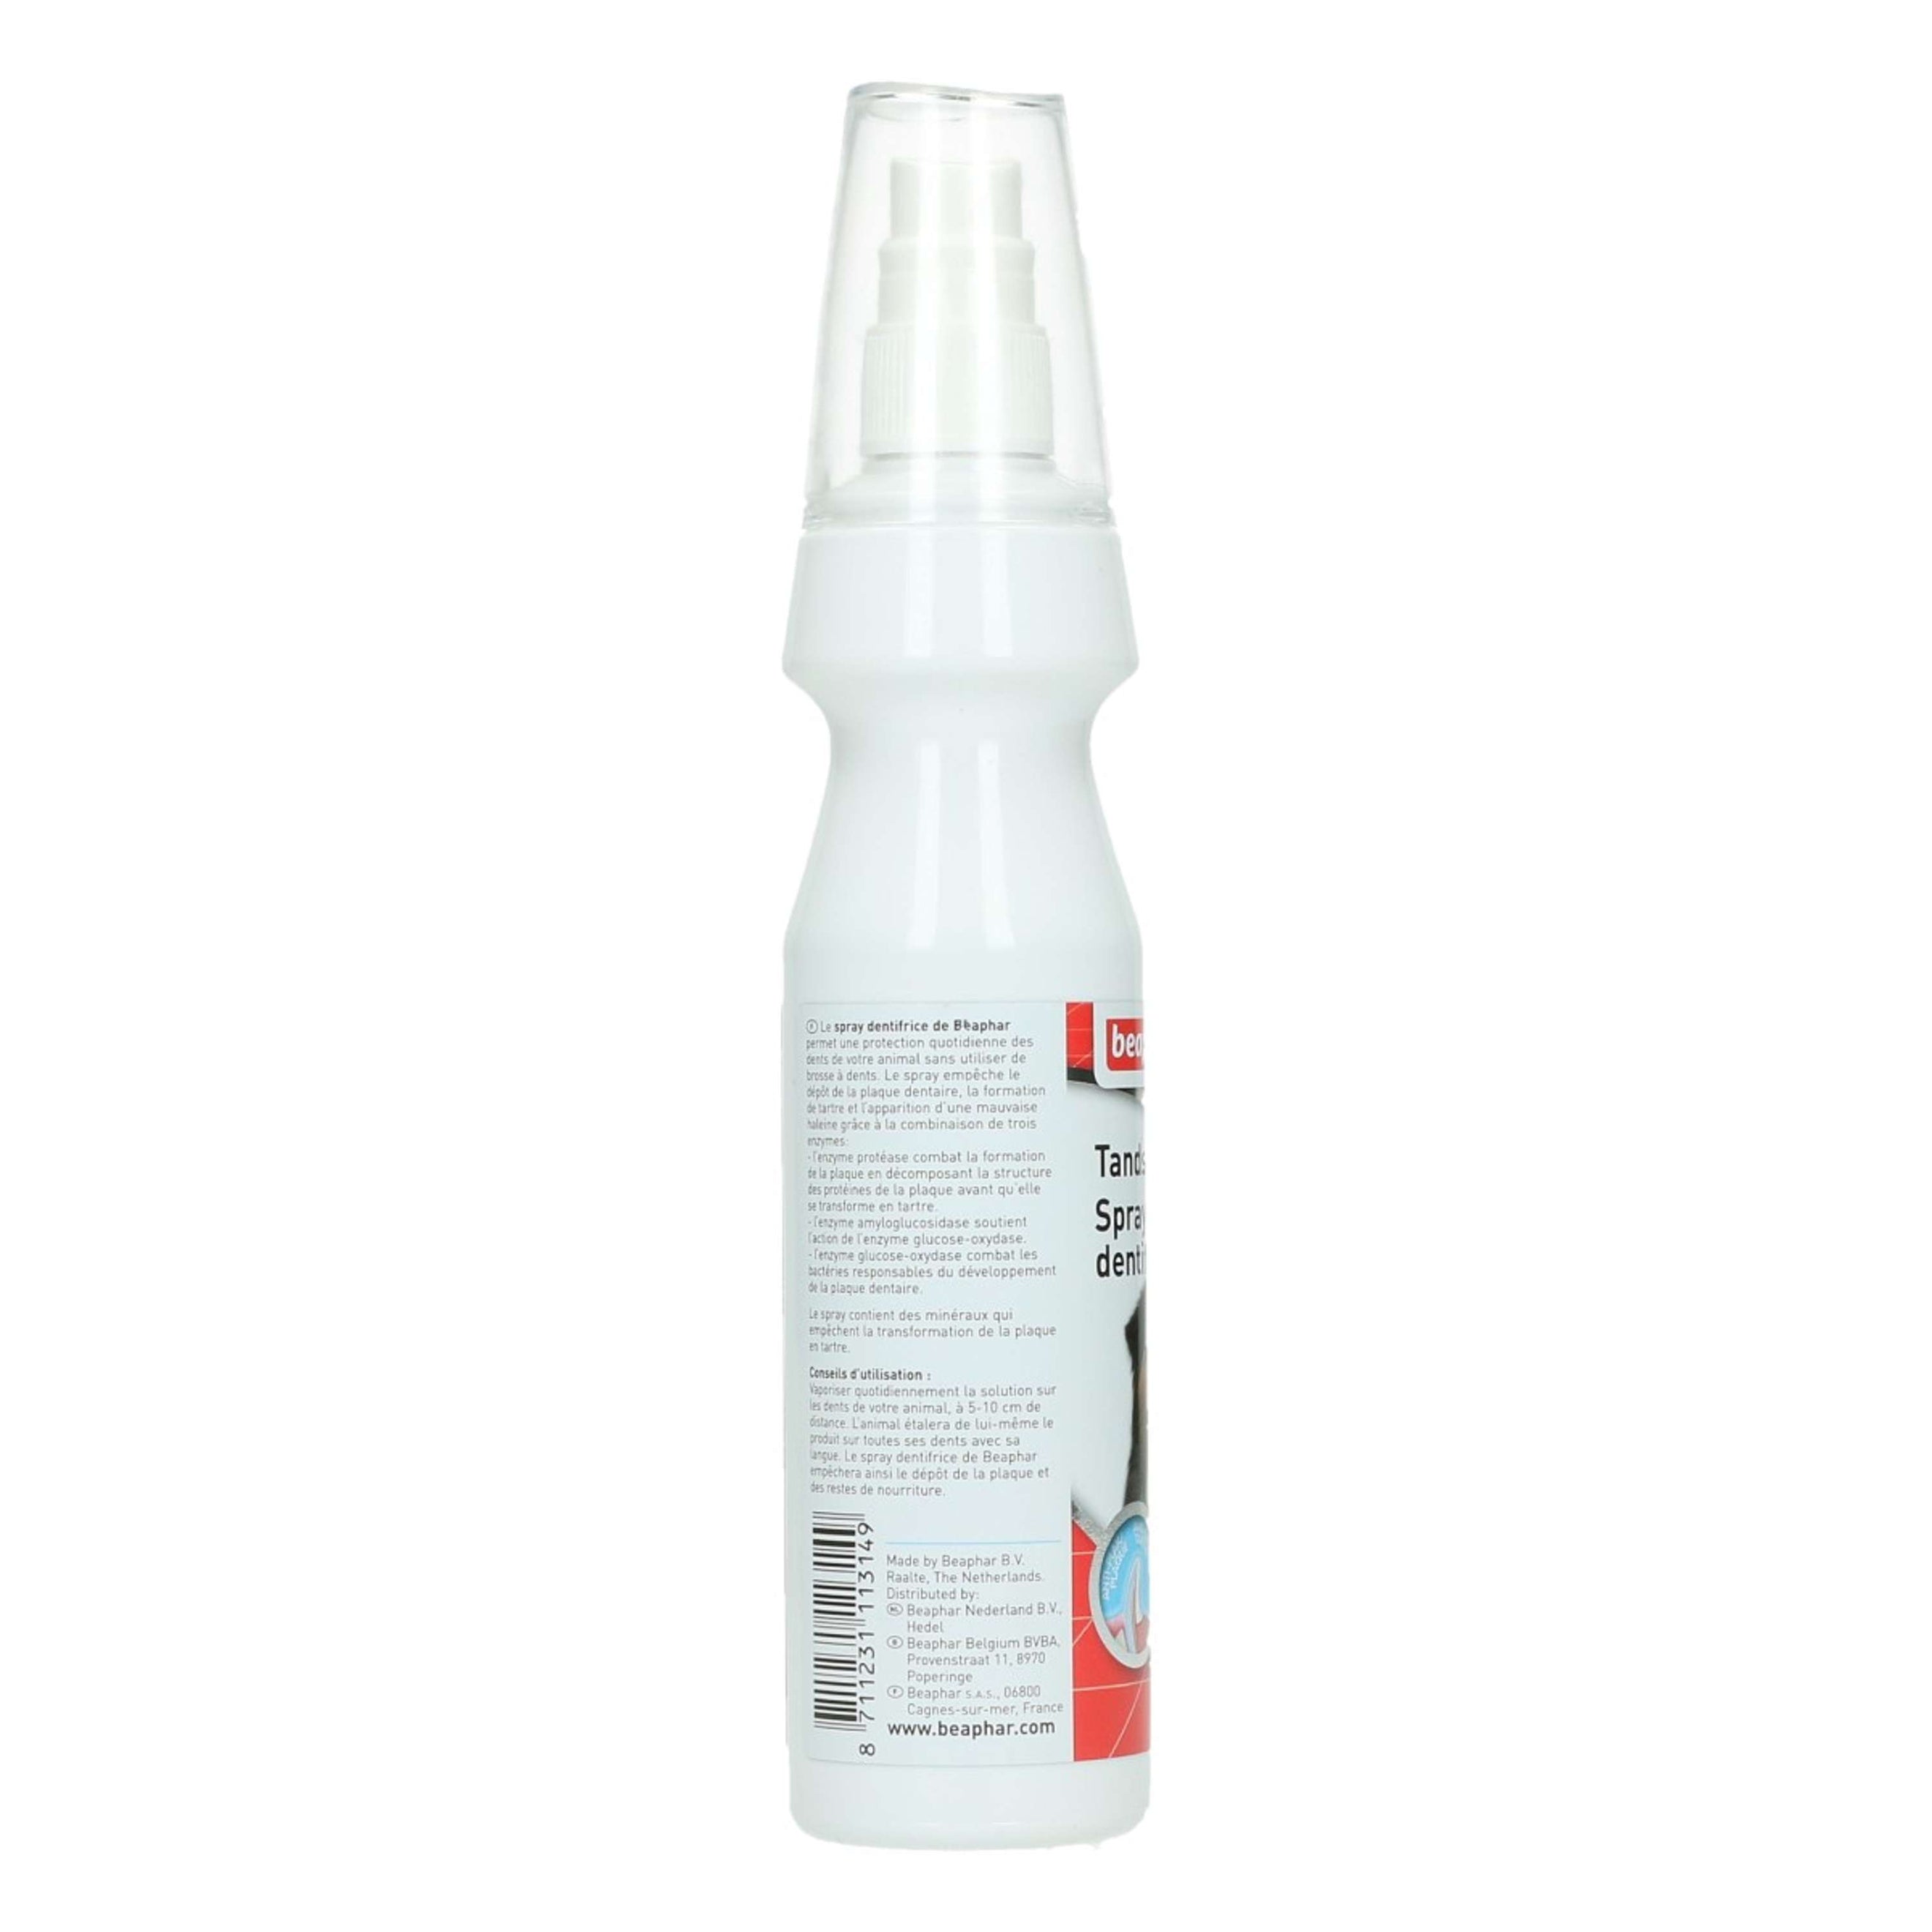 Beaphar Spray pour Dents Chien/Chat